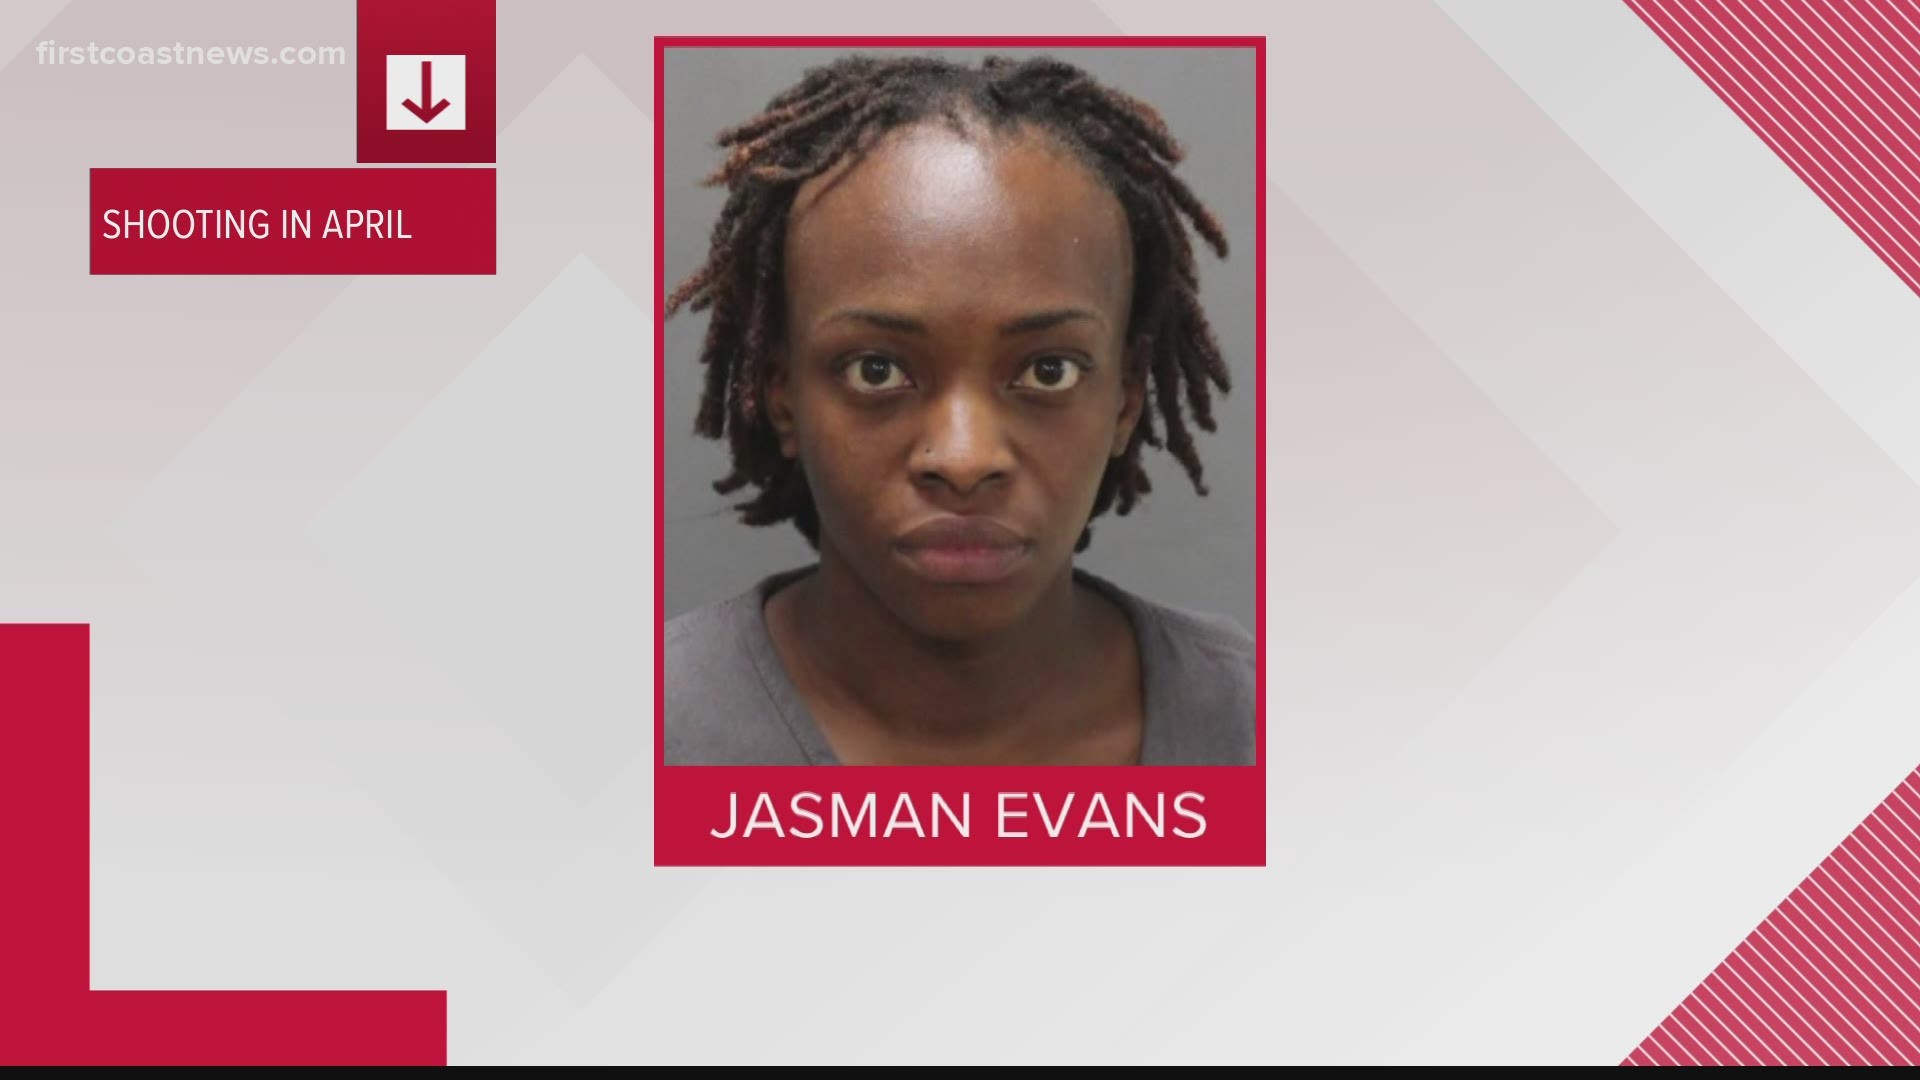 JSO says Jasman Evans shot and killed a 36-year-old victim in April in a shooting on Kennard Street.